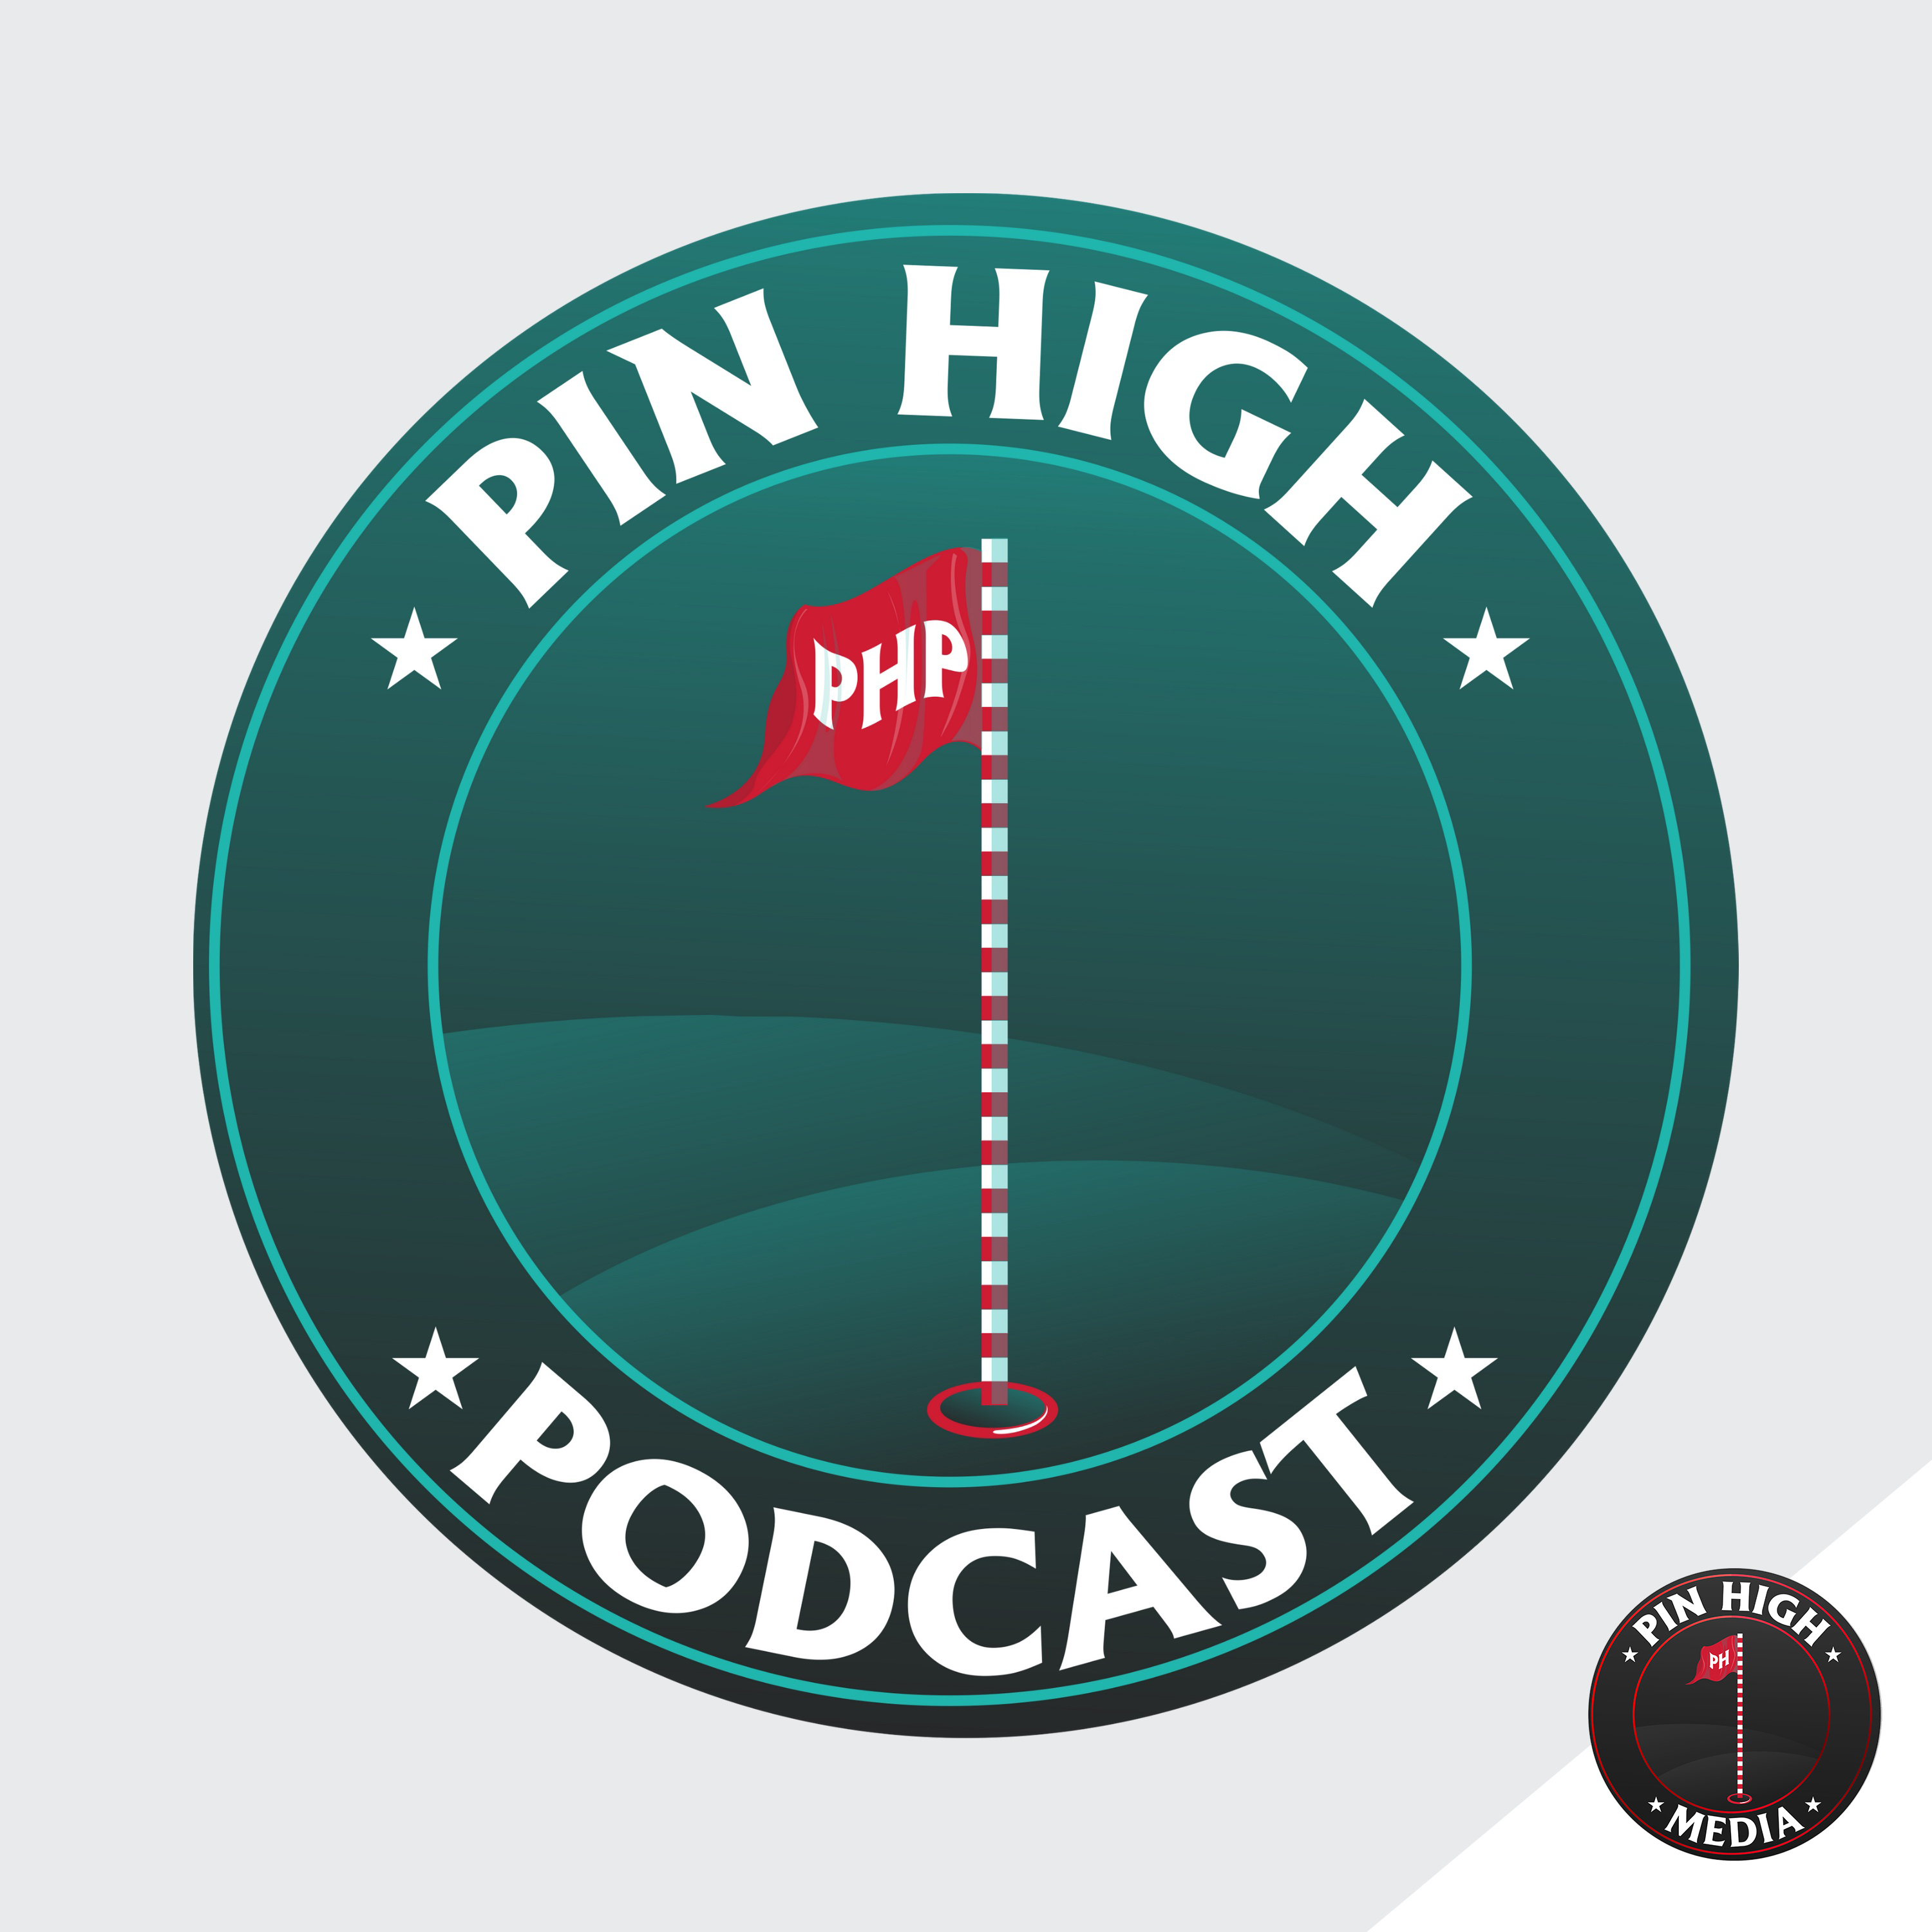 Pin High Podcast Ep. 168: Patrick Reed Controversy + New LIV Golfer & Josh Allen is a Golf Guy?